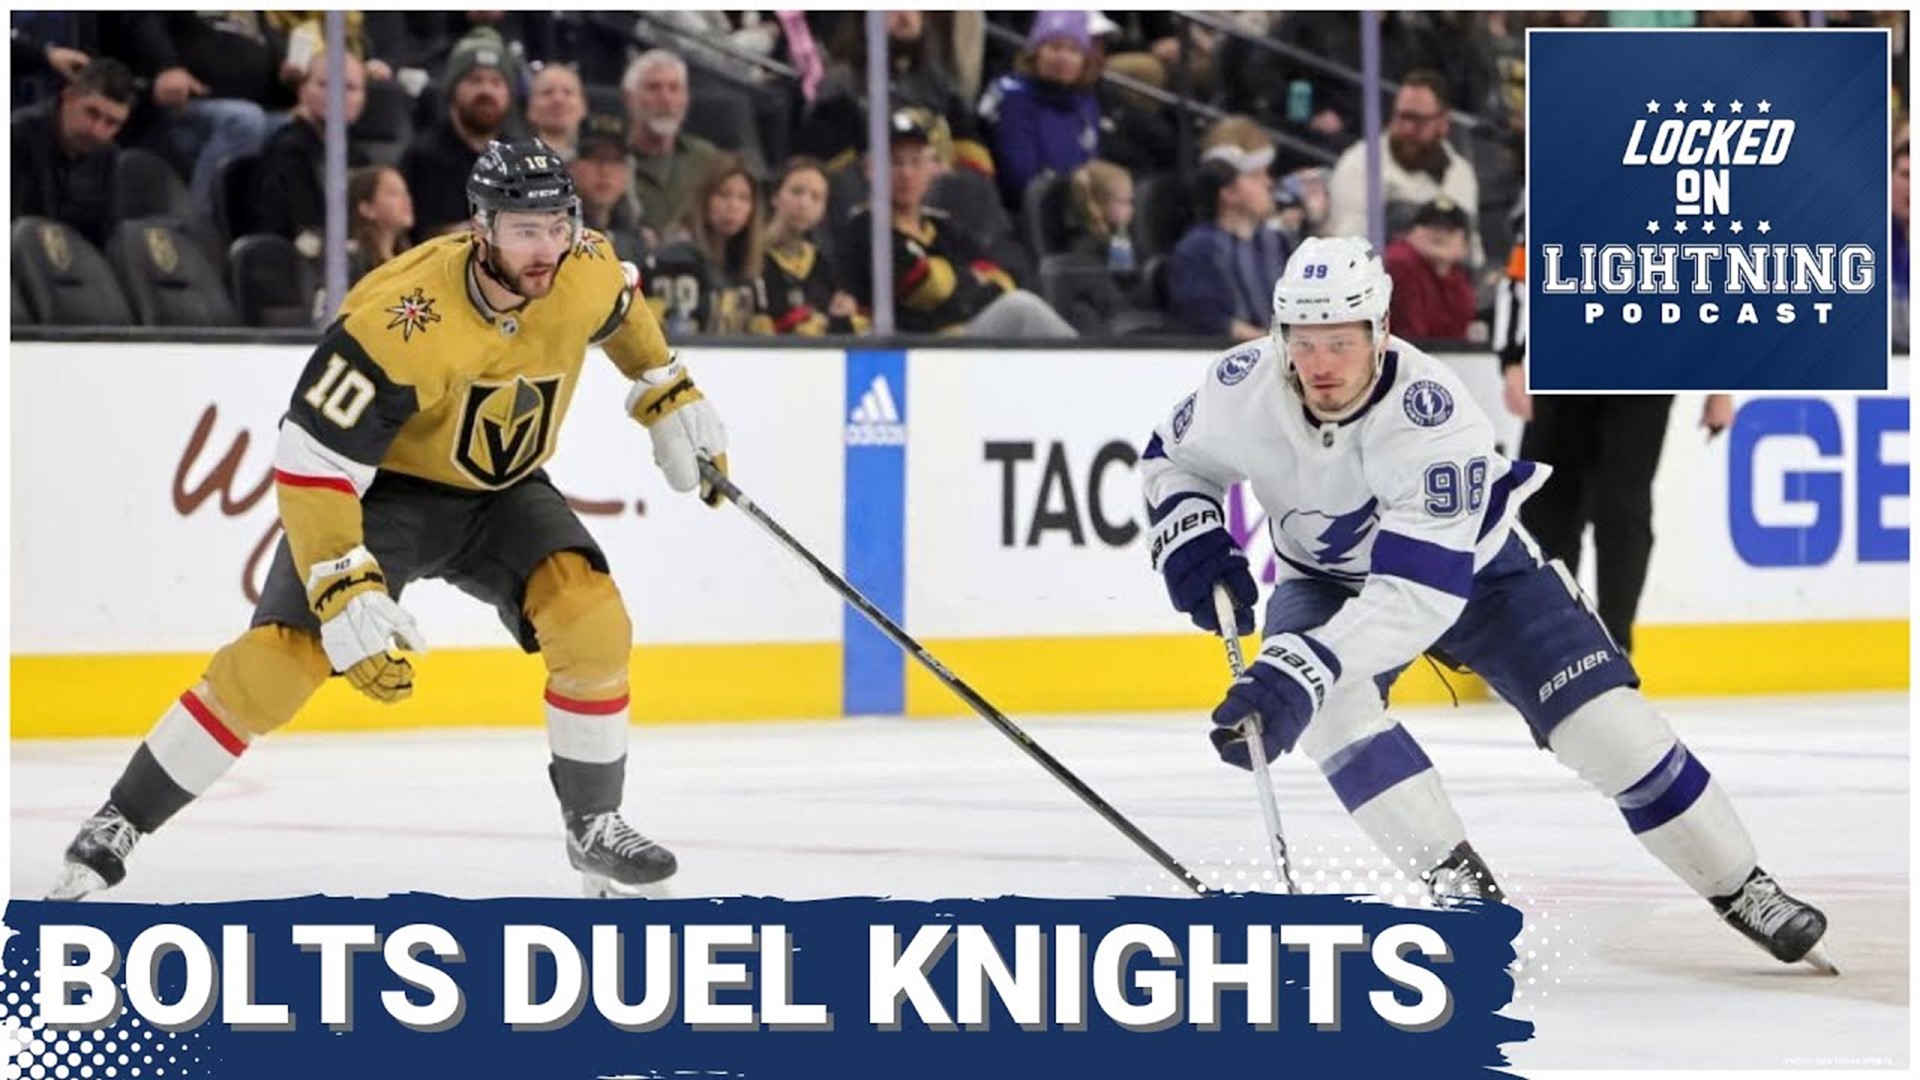 Join us for a pregame preview, as we discuss the Bolts are back in action tonight in their final meeting with the Vegas Golden Knights.